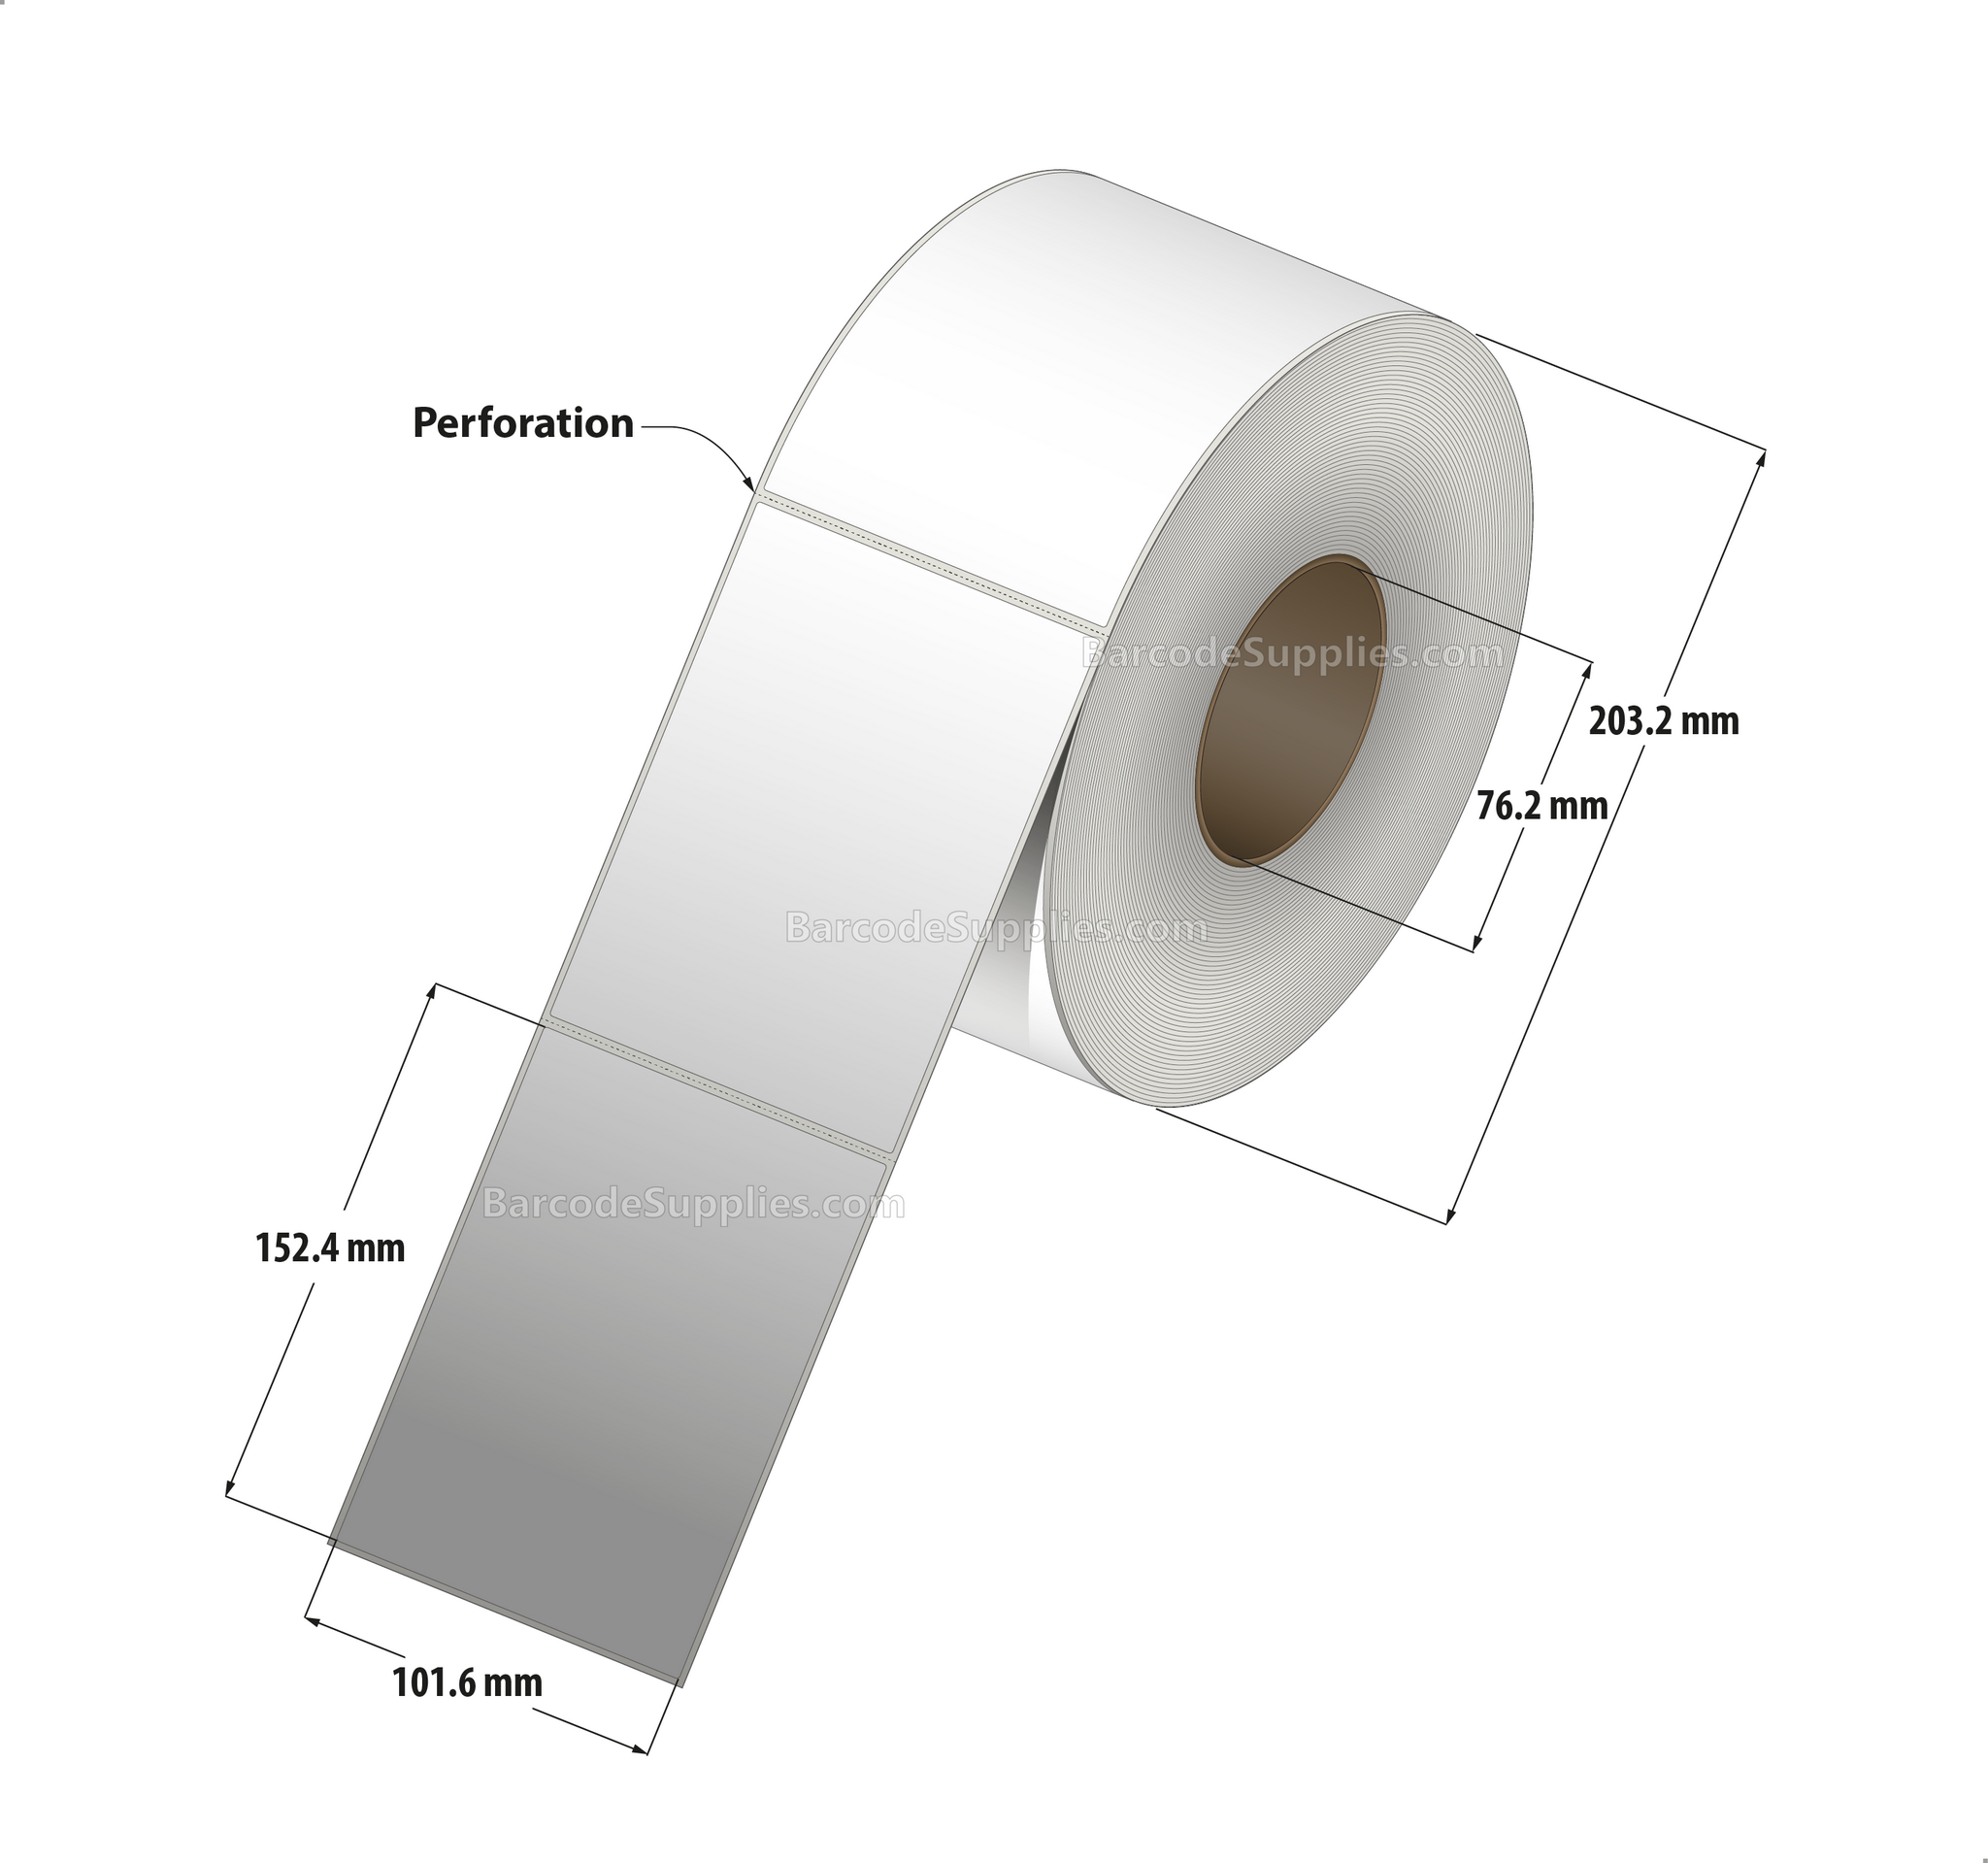 4 x 6 Thermal Transfer White Labels With Permanent Acrylic Adhesive - Perforated - 1000 Labels Per Roll - Carton Of 4 Rolls - 4000 Labels Total - MPN: TH46-1P